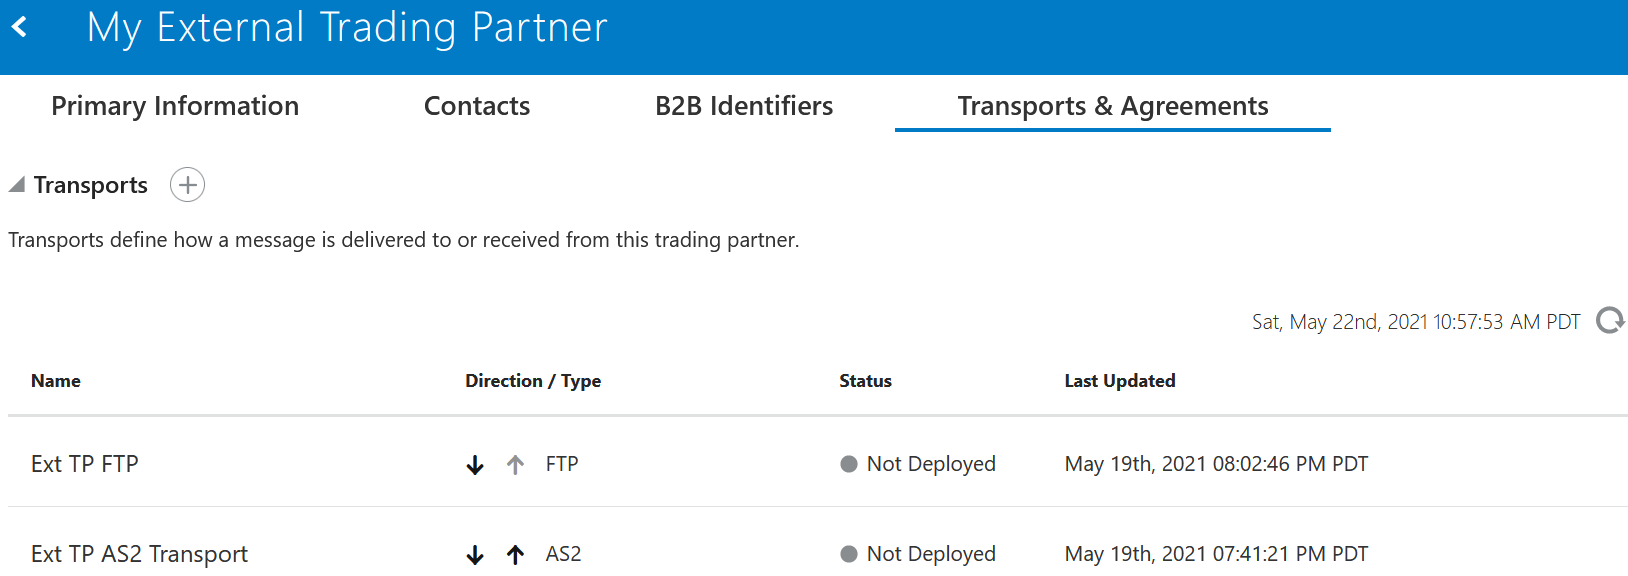 The Primary Information, Contacts, B2B Identifiers, and Transports & Agreements (which is selected) are shown. Below is the Transports section, with a + sign. Below is a table with columns for Name, Direction/Type, Status, and Last Updated.